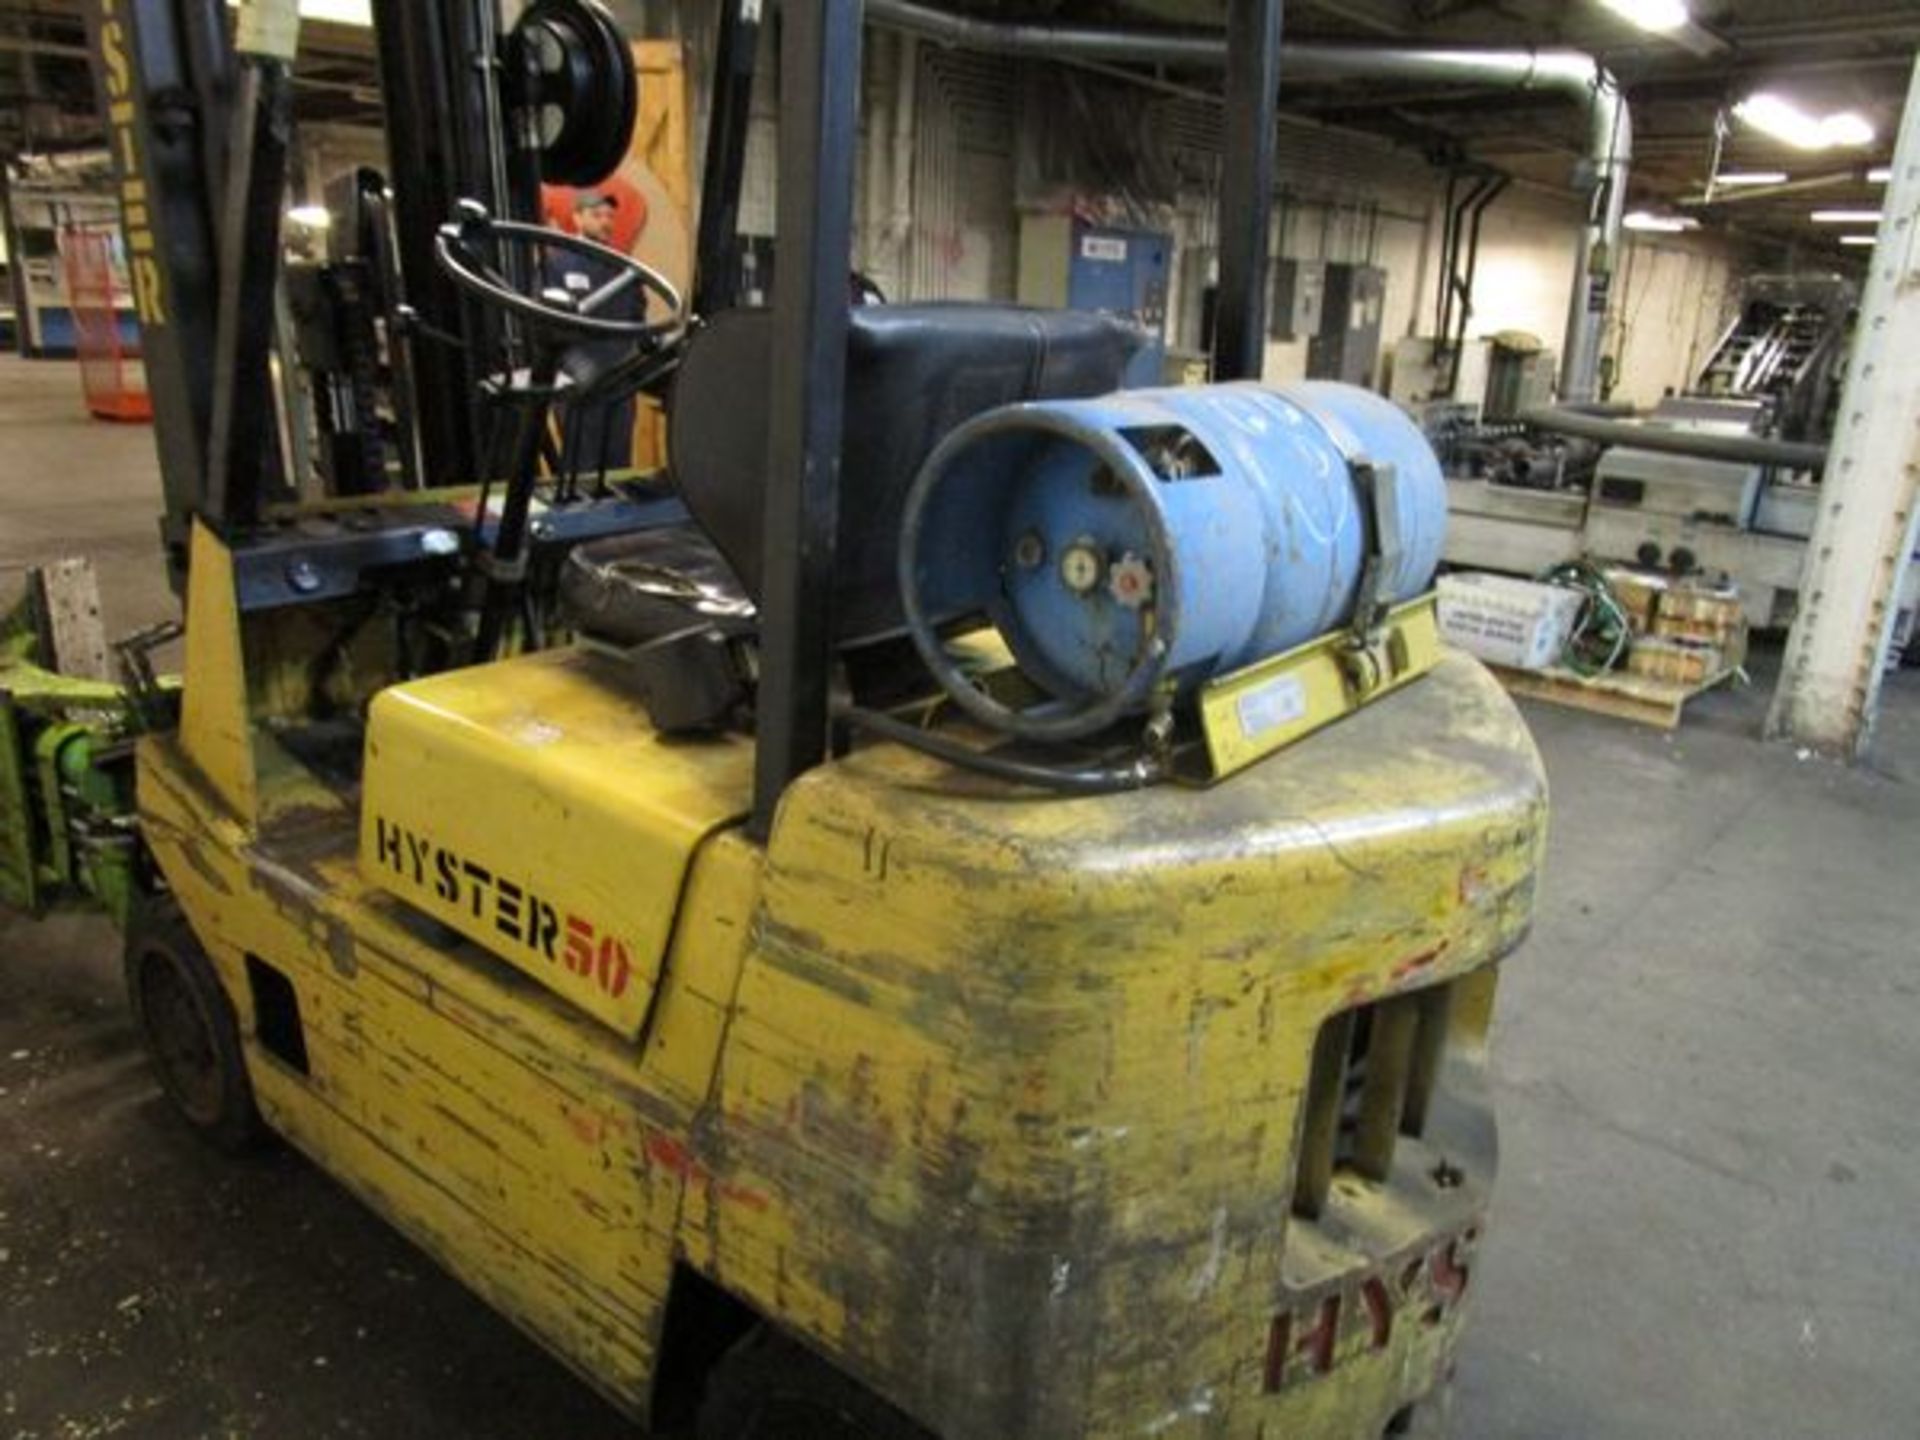 Hyster S50XL LPG Forklift, s/n A187V09417J, 5450 Lb., 187" Lift, 7292 Hrs., Roll Clamp - Image 3 of 6